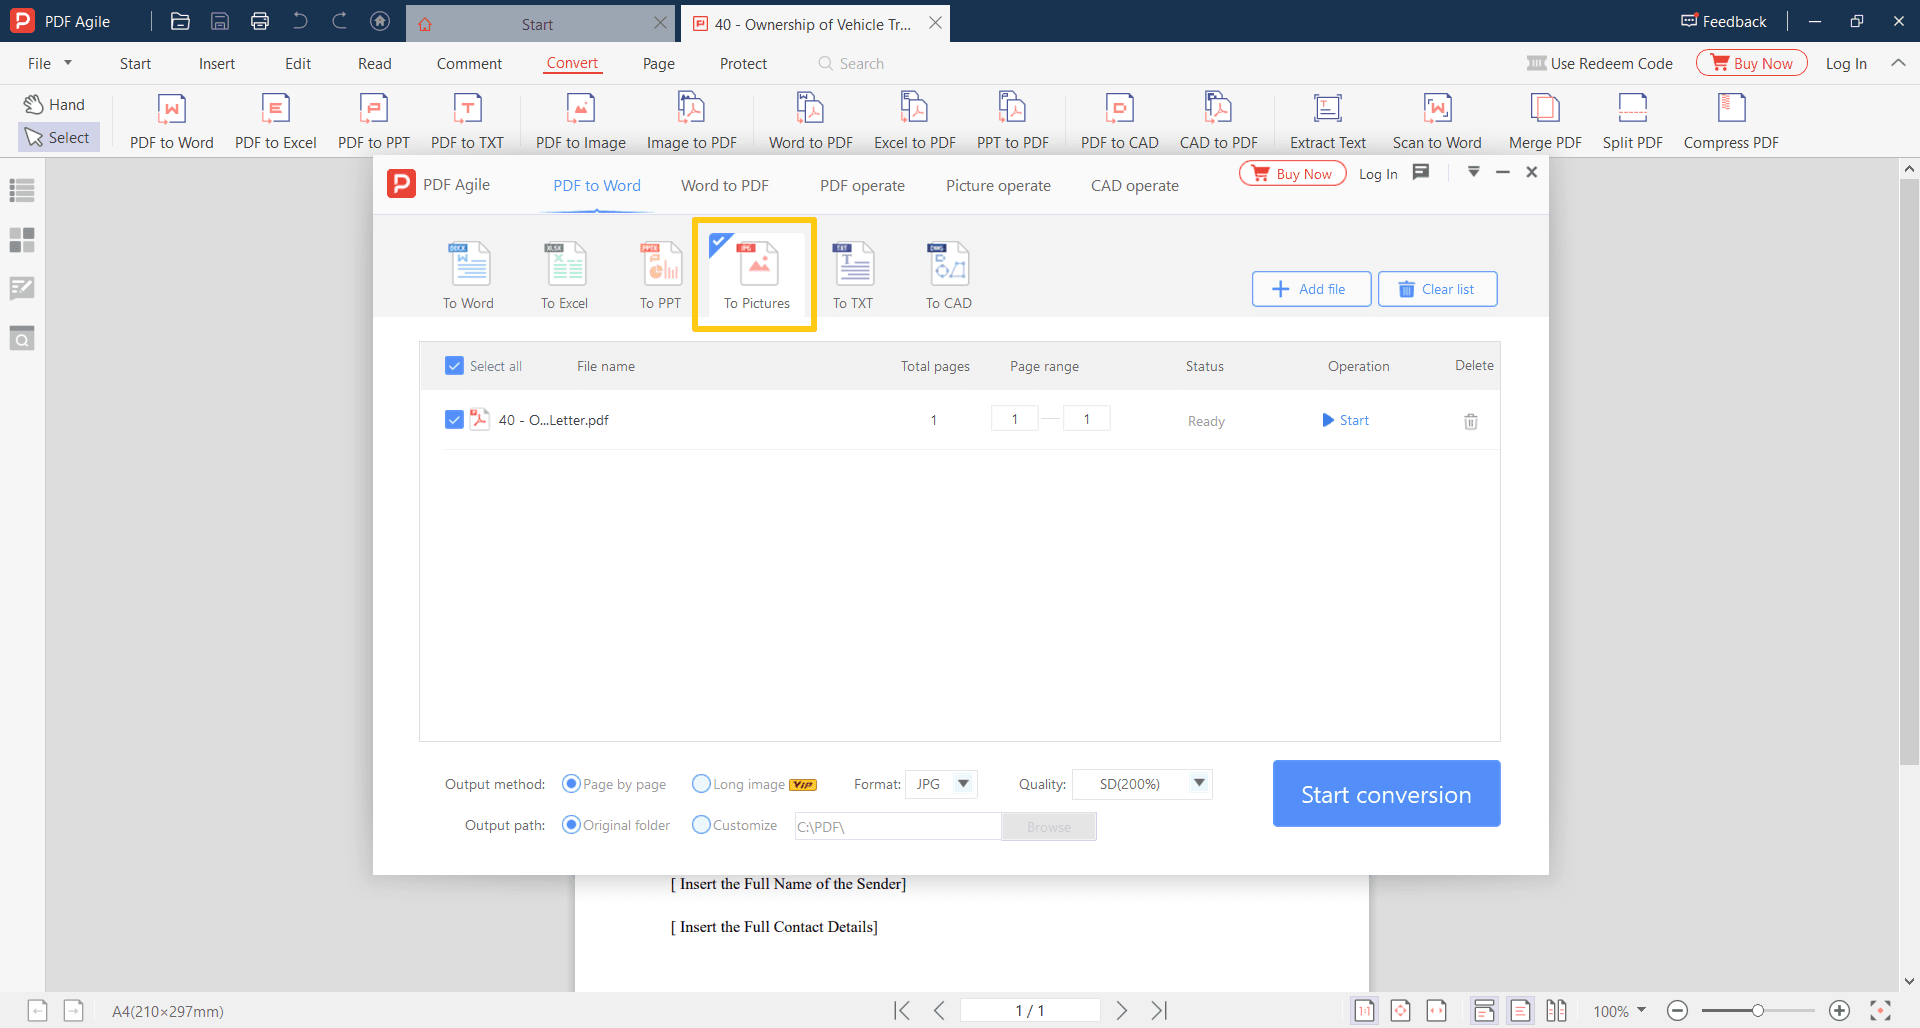 Upload your PDF, and it will be converted to JPG or PNG.png